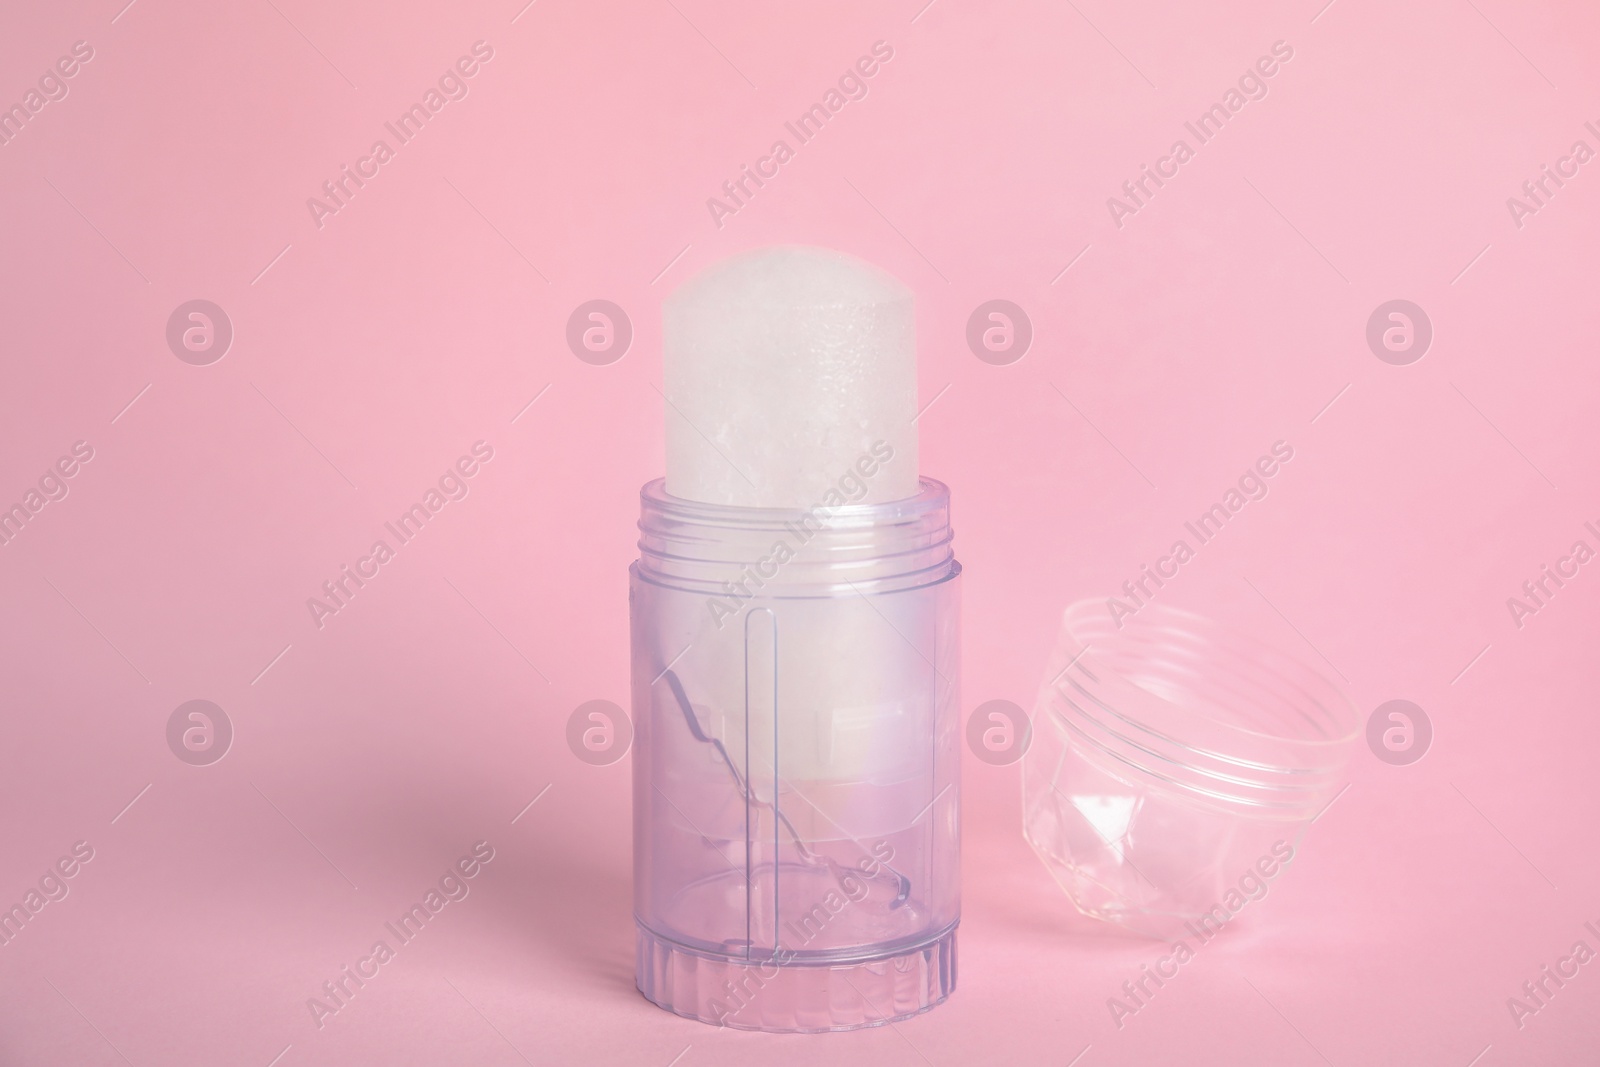 Photo of Natural crystal alum stick deodorant and cap on pink background